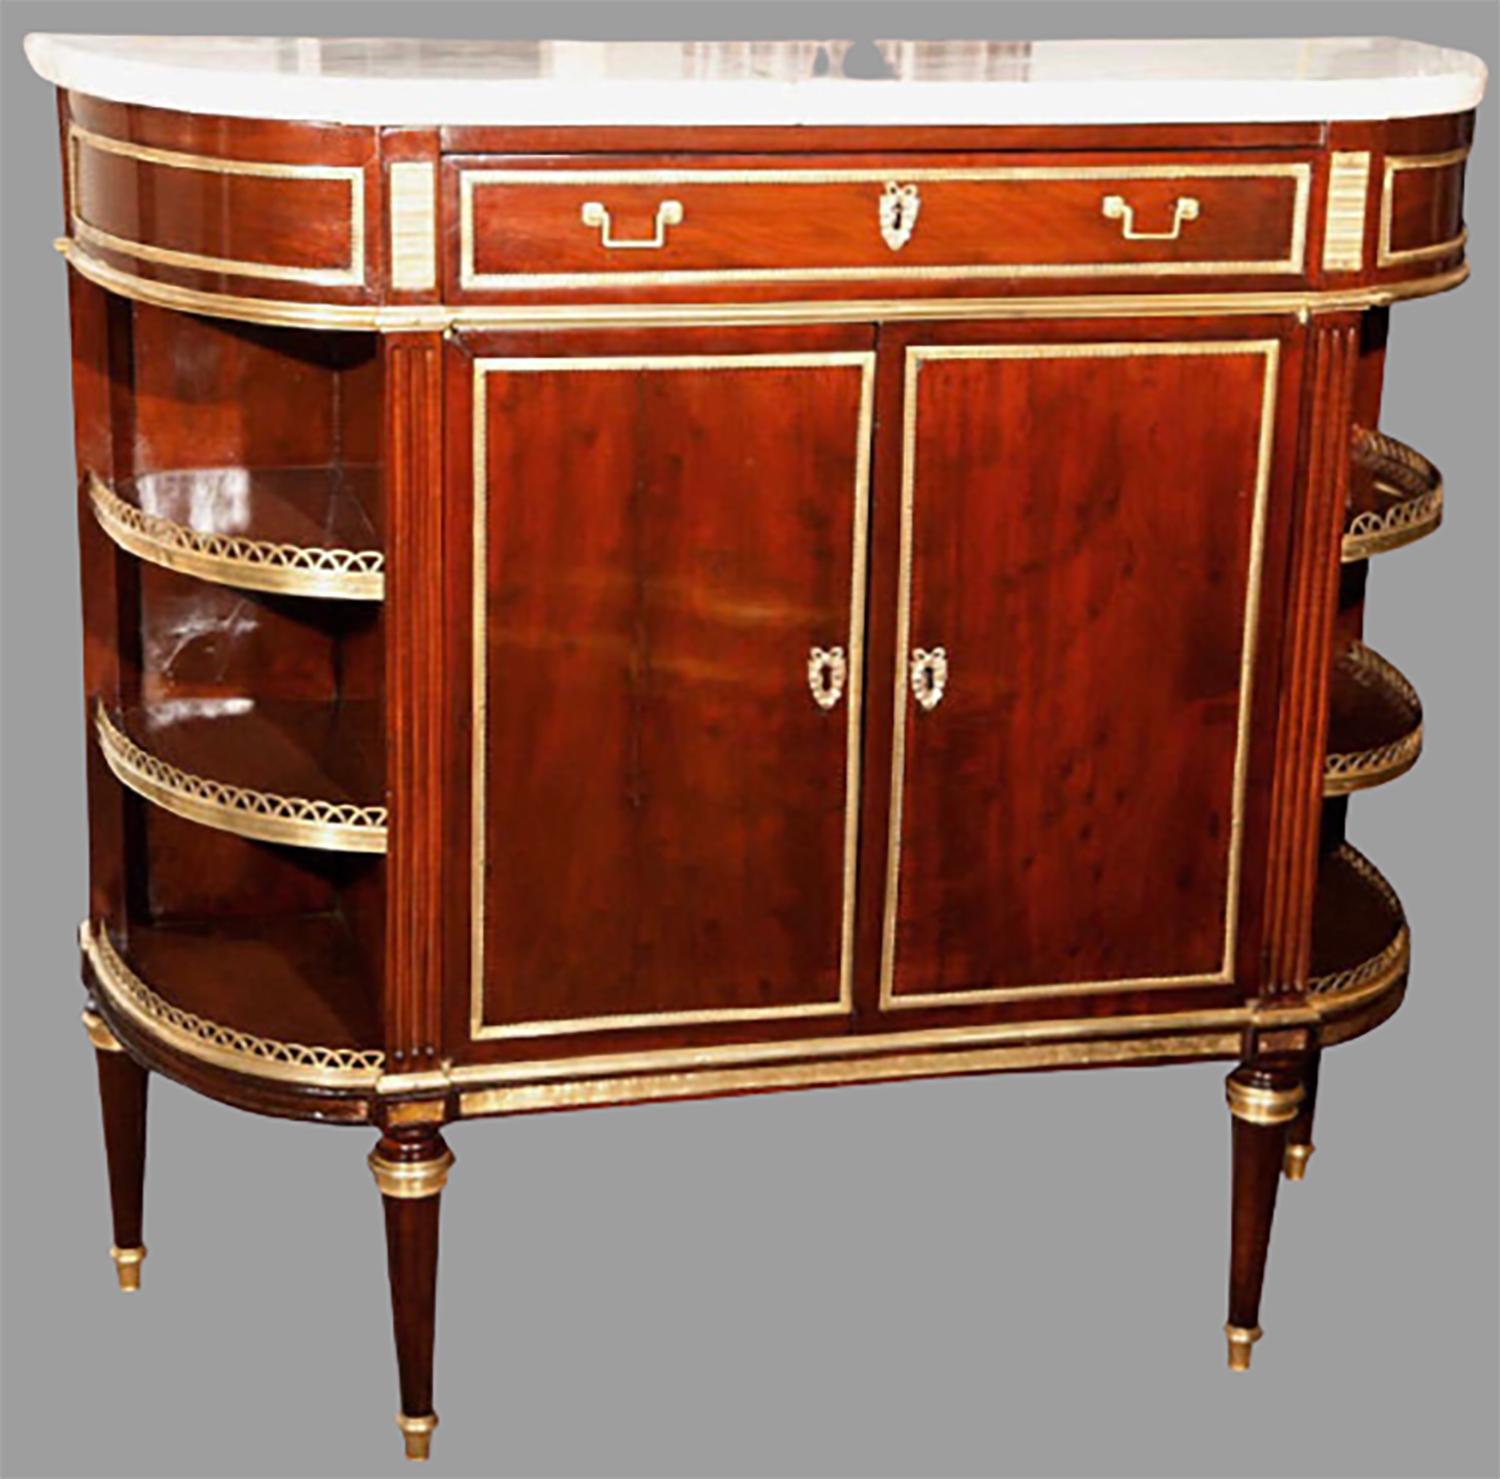 Late 19th century desserte server by Maison Jansen. Finest bronze mounts adorn this one of a kind flame mahogany desserte stand. The top white Carrara marble supported by a lower case having a center drawer over two doors flanked by a set of three